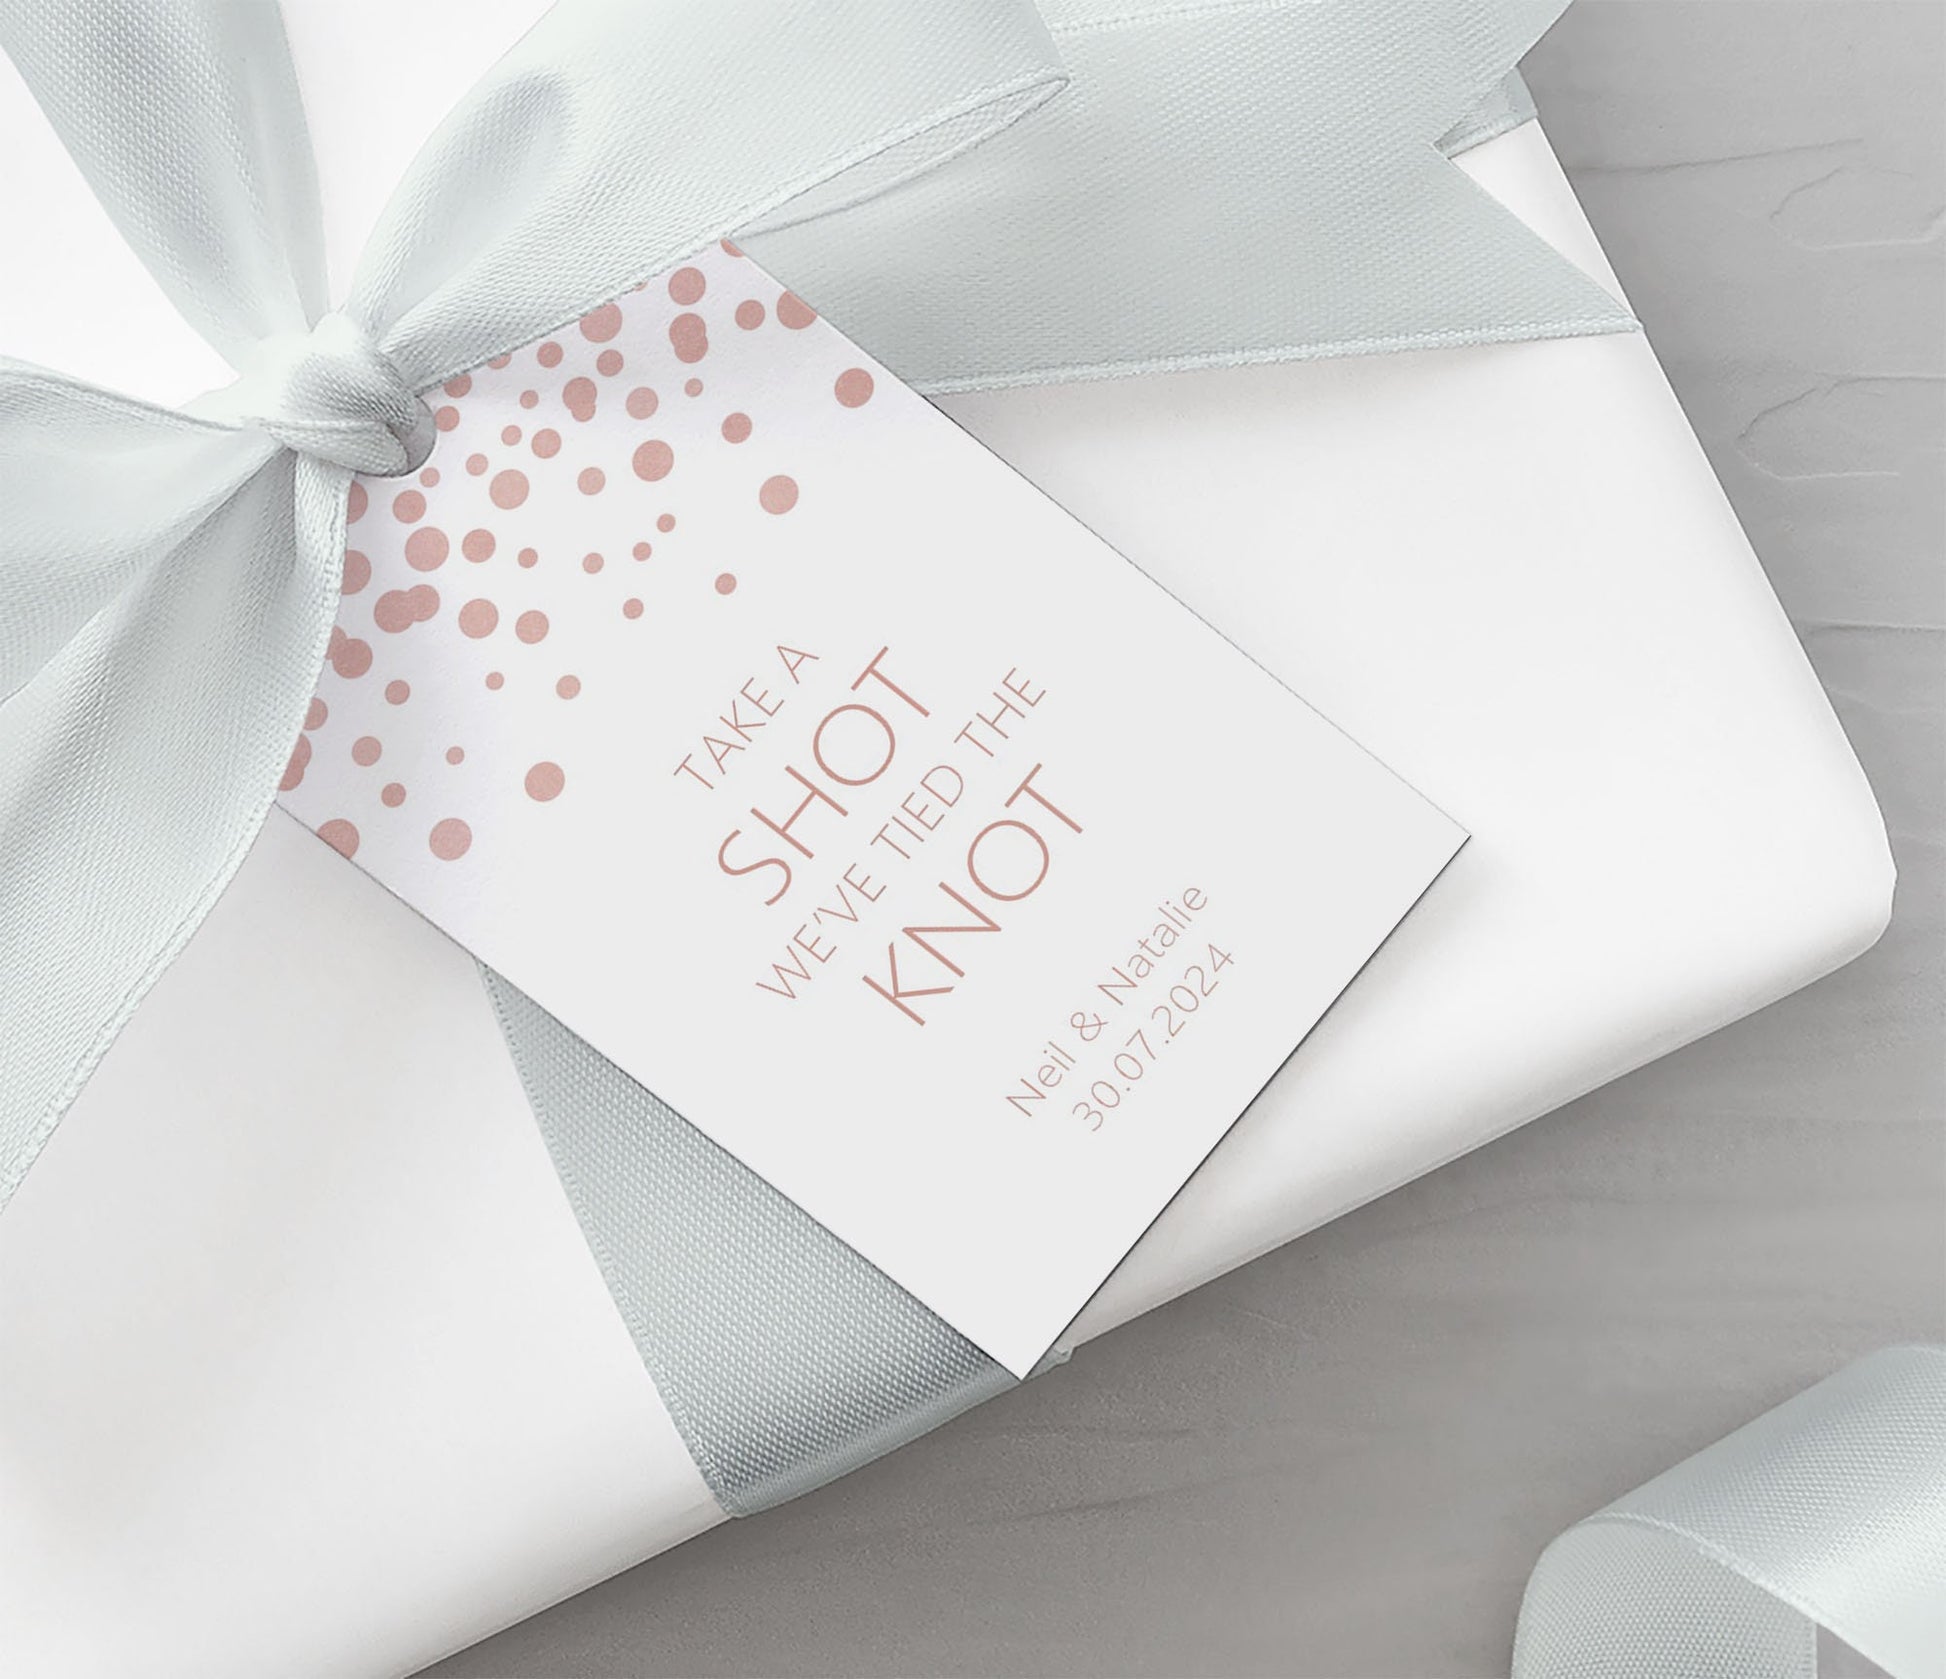 Take A Shot Wedding Gift Tag, Blush Confetti Personalised Pack Of 10